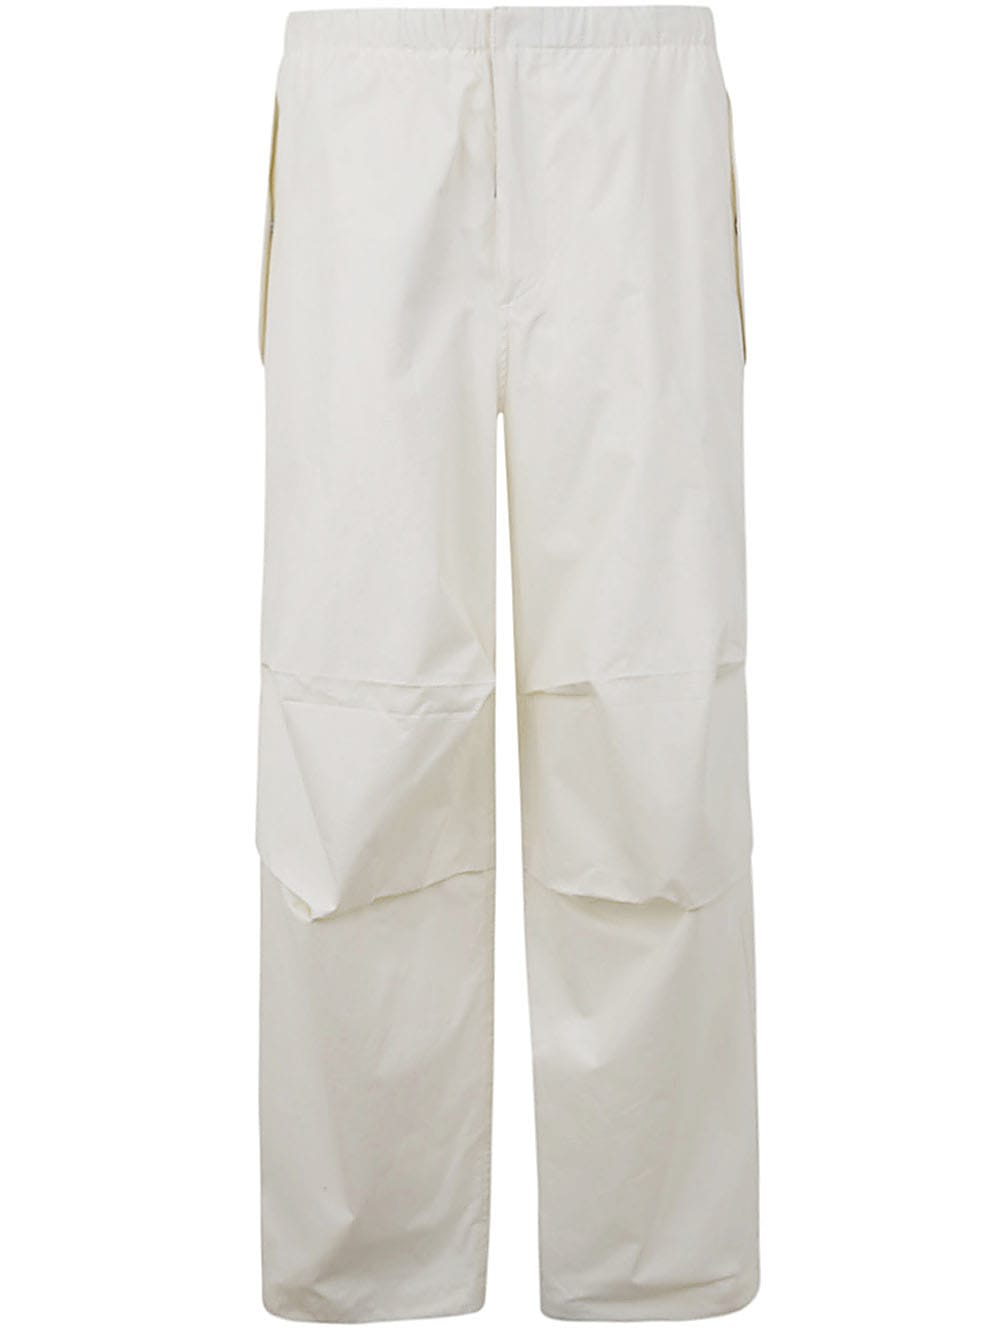 Shop Jil Sander 50 Aw 30 Fit 2 Loose Fit Trousers In Chalk